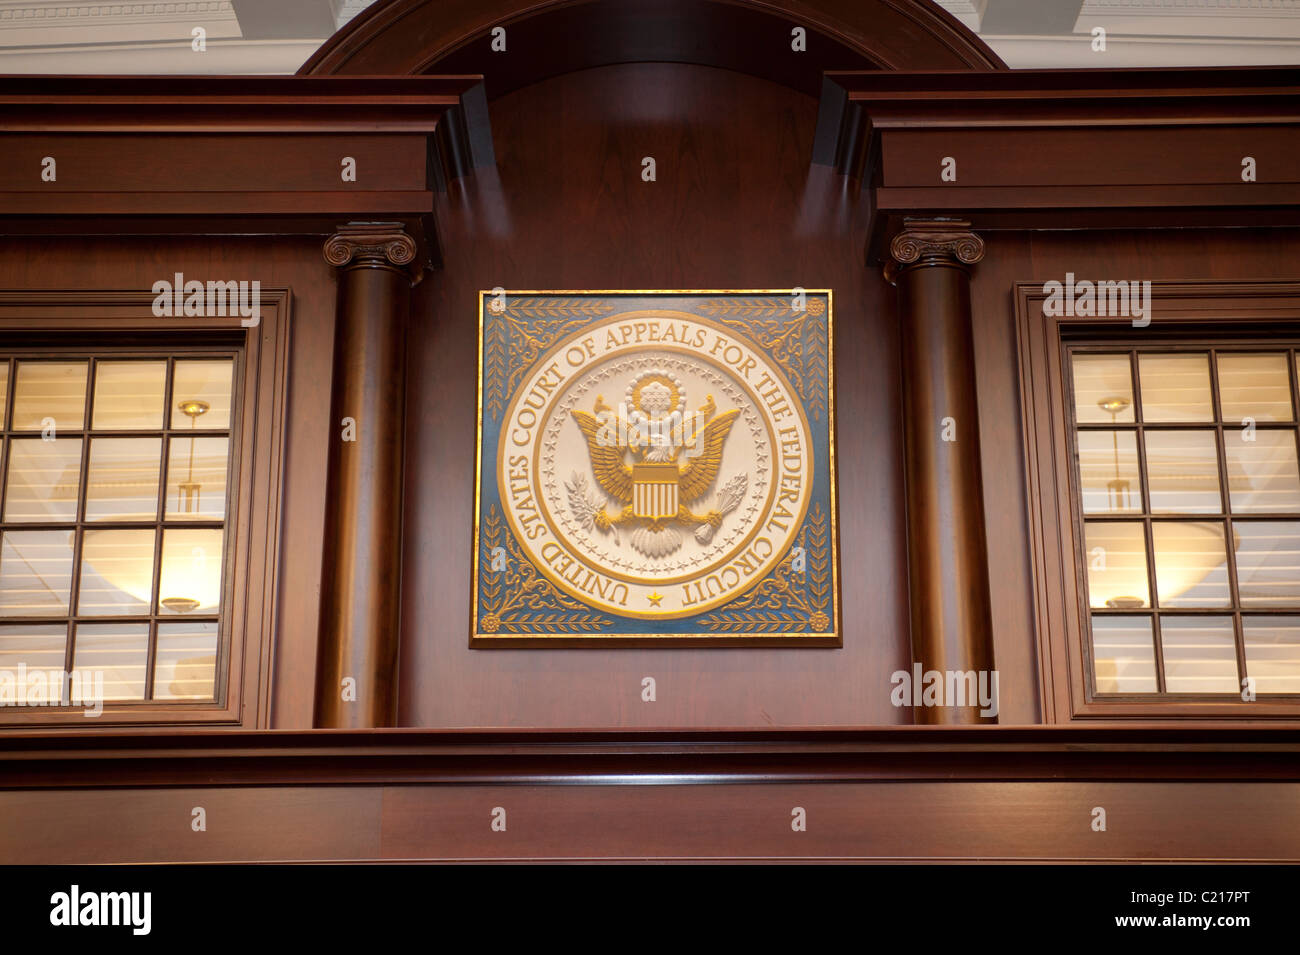 Interior United States Court of Appeals for the federal circuit -  Seal - Washington DC Stock Photo